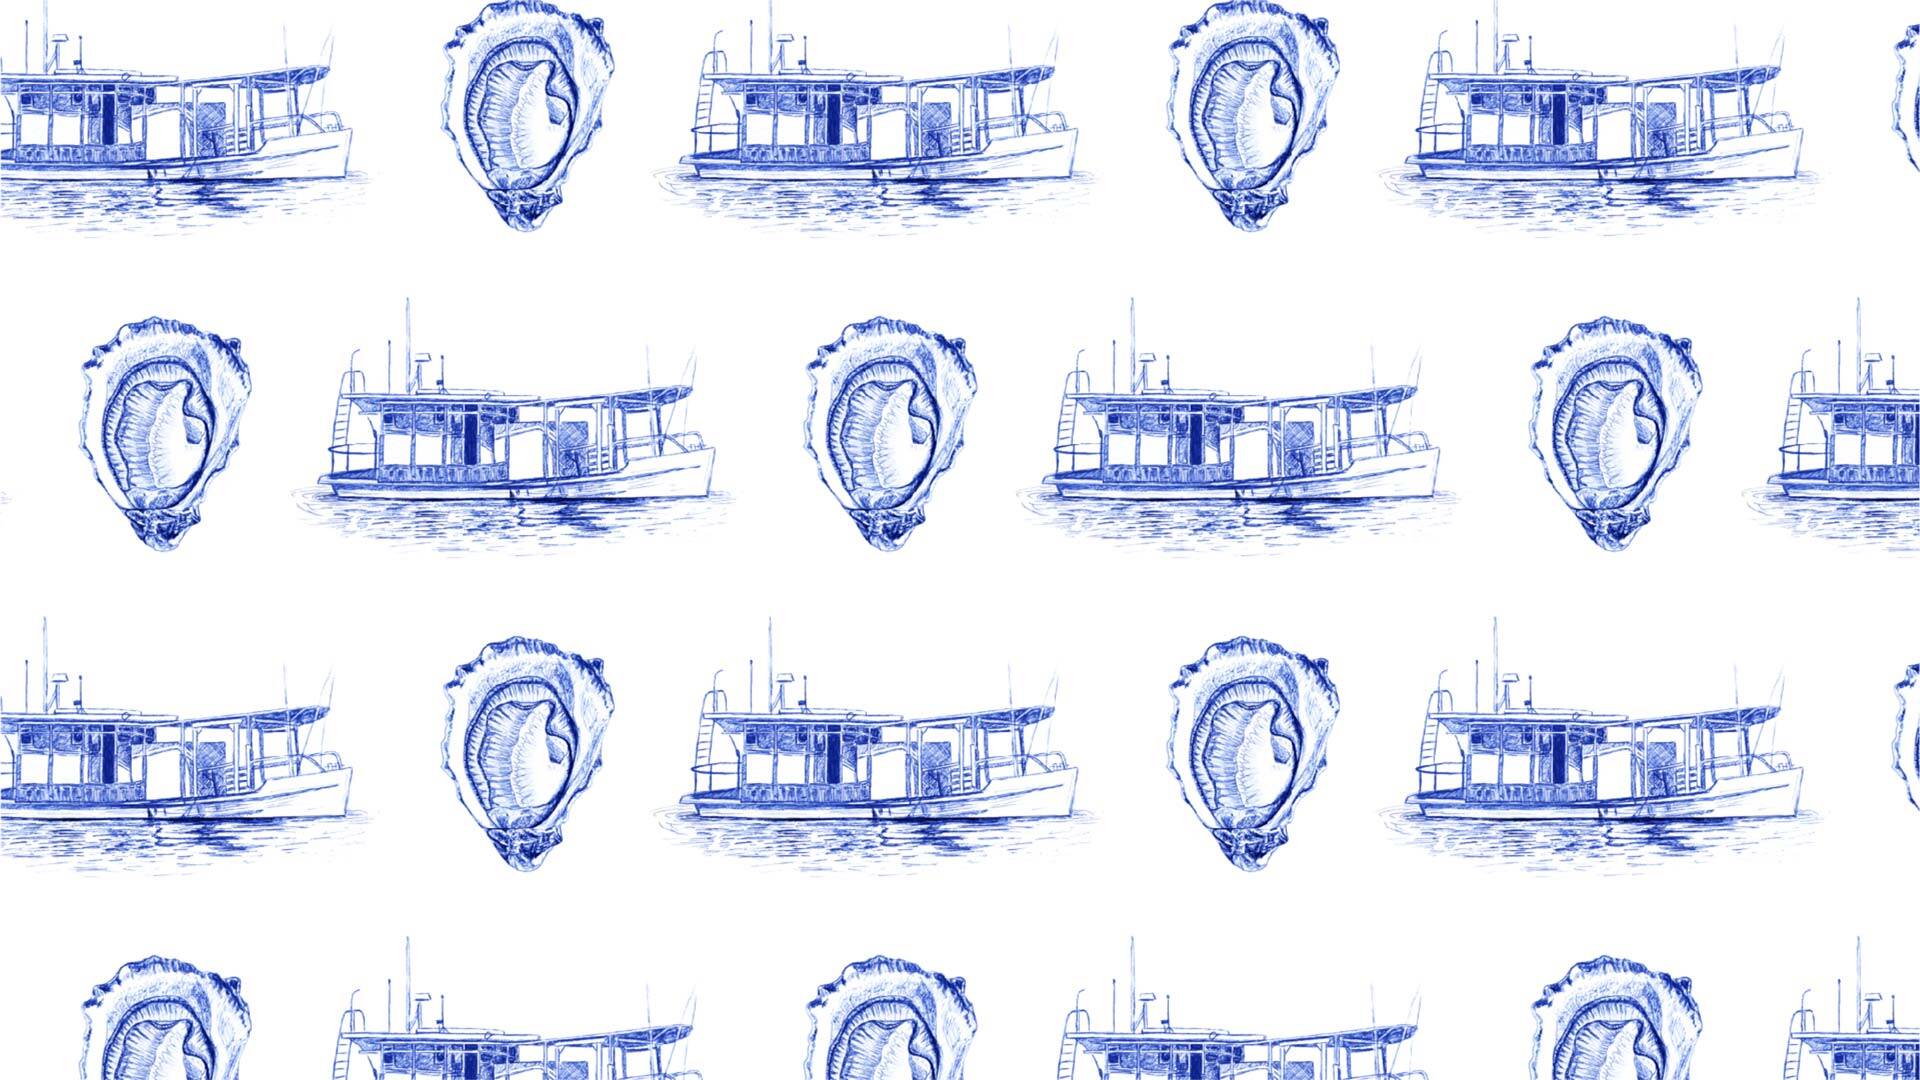 Graphic design pattern for Jeri's Oysters by Tilted Chair